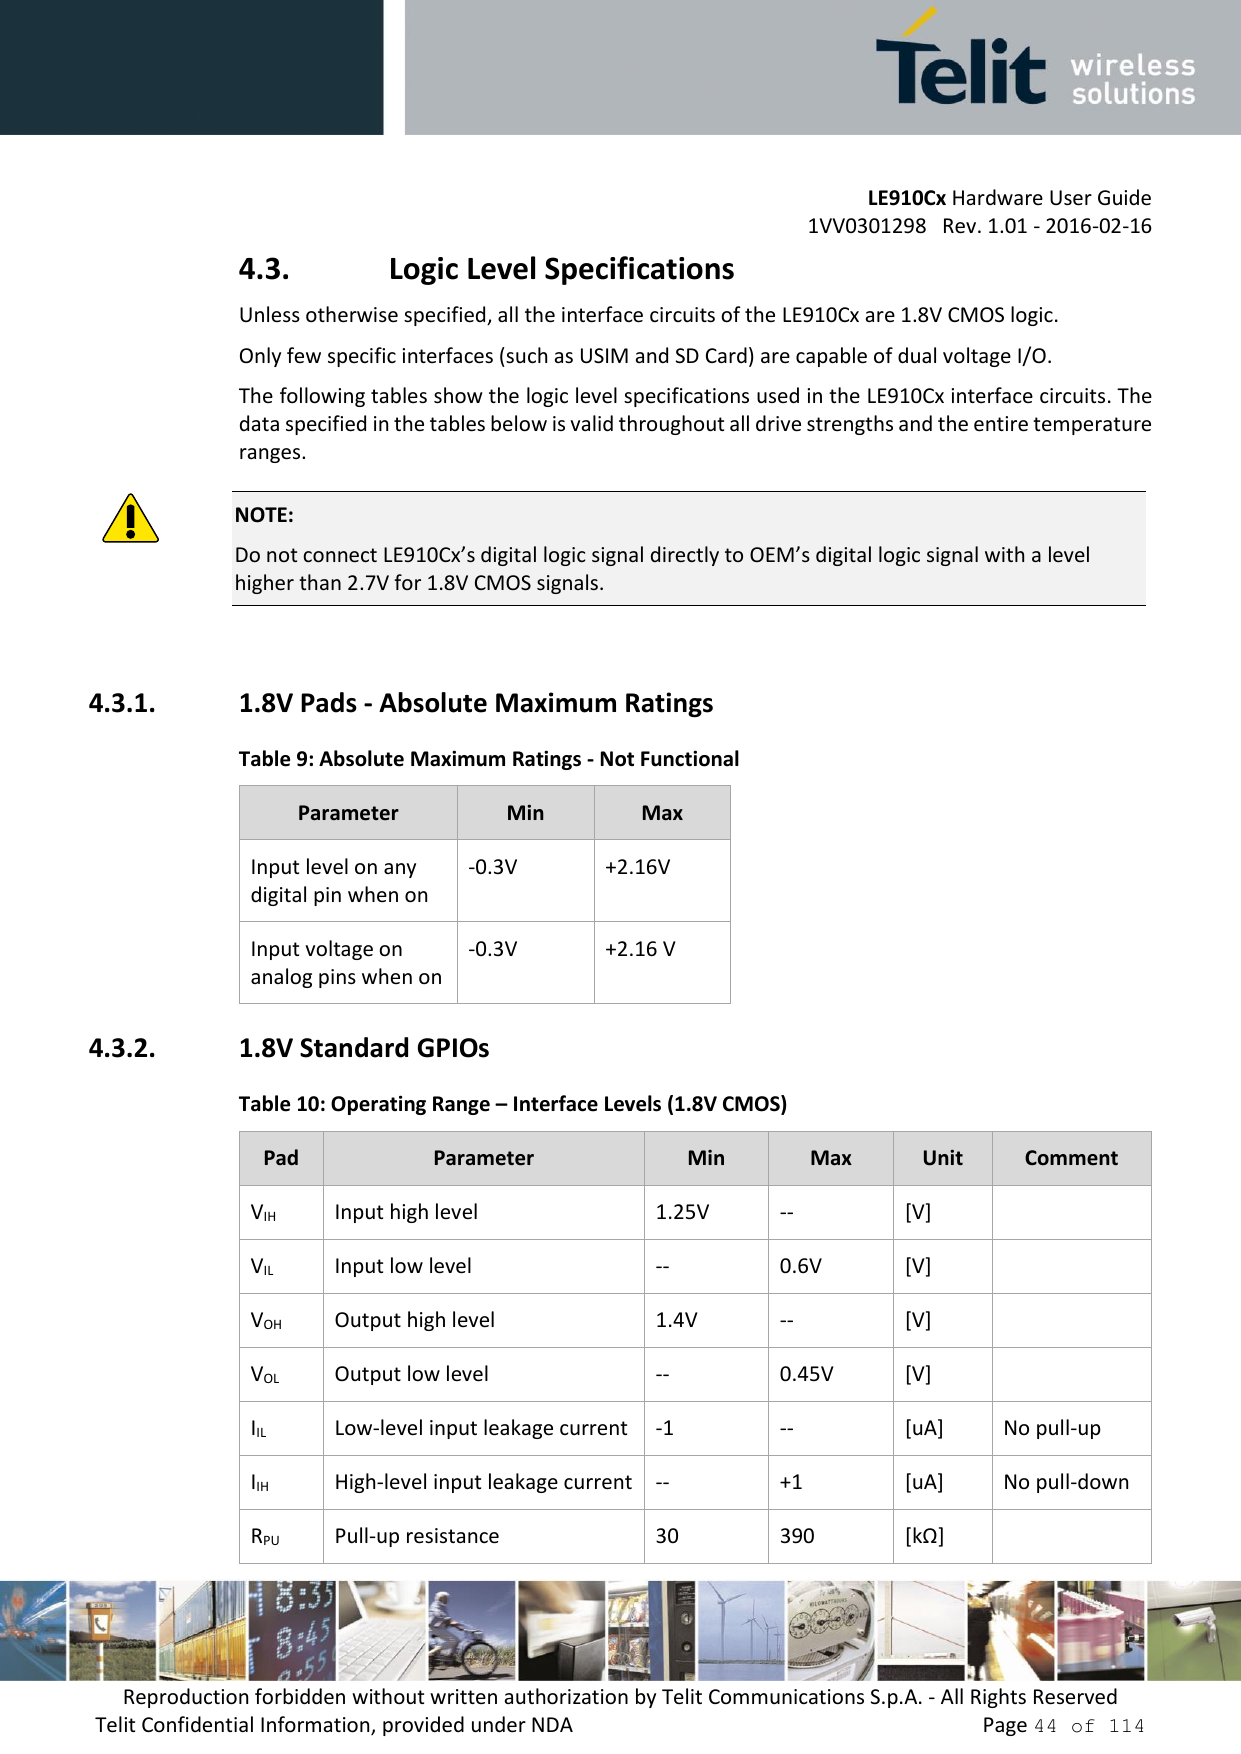         LE910Cx Hardware User Guide     1VV0301298   Rev. 1.01 - 2016-02-16 Reproduction forbidden without written authorization by Telit Communications S.p.A. - All Rights Reserved Telit Confidential Information, provided under NDA                 Page 44 of 114 4.3. Logic Level Specifications Unless otherwise specified, all the interface circuits of the LE910Cx are 1.8V CMOS logic. Only few specific interfaces (such as USIM and SD Card) are capable of dual voltage I/O. The following tables show the logic level specifications used in the LE910Cx interface circuits. The data specified in the tables below is valid throughout all drive strengths and the entire temperature ranges.  NOTE: Do not connect LE910Cx’s digital logic signal directly to OEM’s digital logic signal with a level higher than 2.7V for 1.8V CMOS signals.  4.3.1. 1.8V Pads - Absolute Maximum Ratings Table 9: Absolute Maximum Ratings - Not Functional Parameter Min Max Input level on any digital pin when on -0.3V +2.16V Input voltage on analog pins when on -0.3V +2.16 V 4.3.2. 1.8V Standard GPIOs Table 10: Operating Range – Interface Levels (1.8V CMOS) Pad Parameter Min Max Unit Comment VIH Input high level 1.25V -- [V]  VIL Input low level -- 0.6V [V]  VOH Output high level 1.4V -- [V]  VOL Output low level -- 0.45V [V]  IIL Low-level input leakage current -1 -- [uA] No pull-up IIH High-level input leakage current -- +1 [uA] No pull-down RPU Pull-up resistance 30 390 [kΩ]  